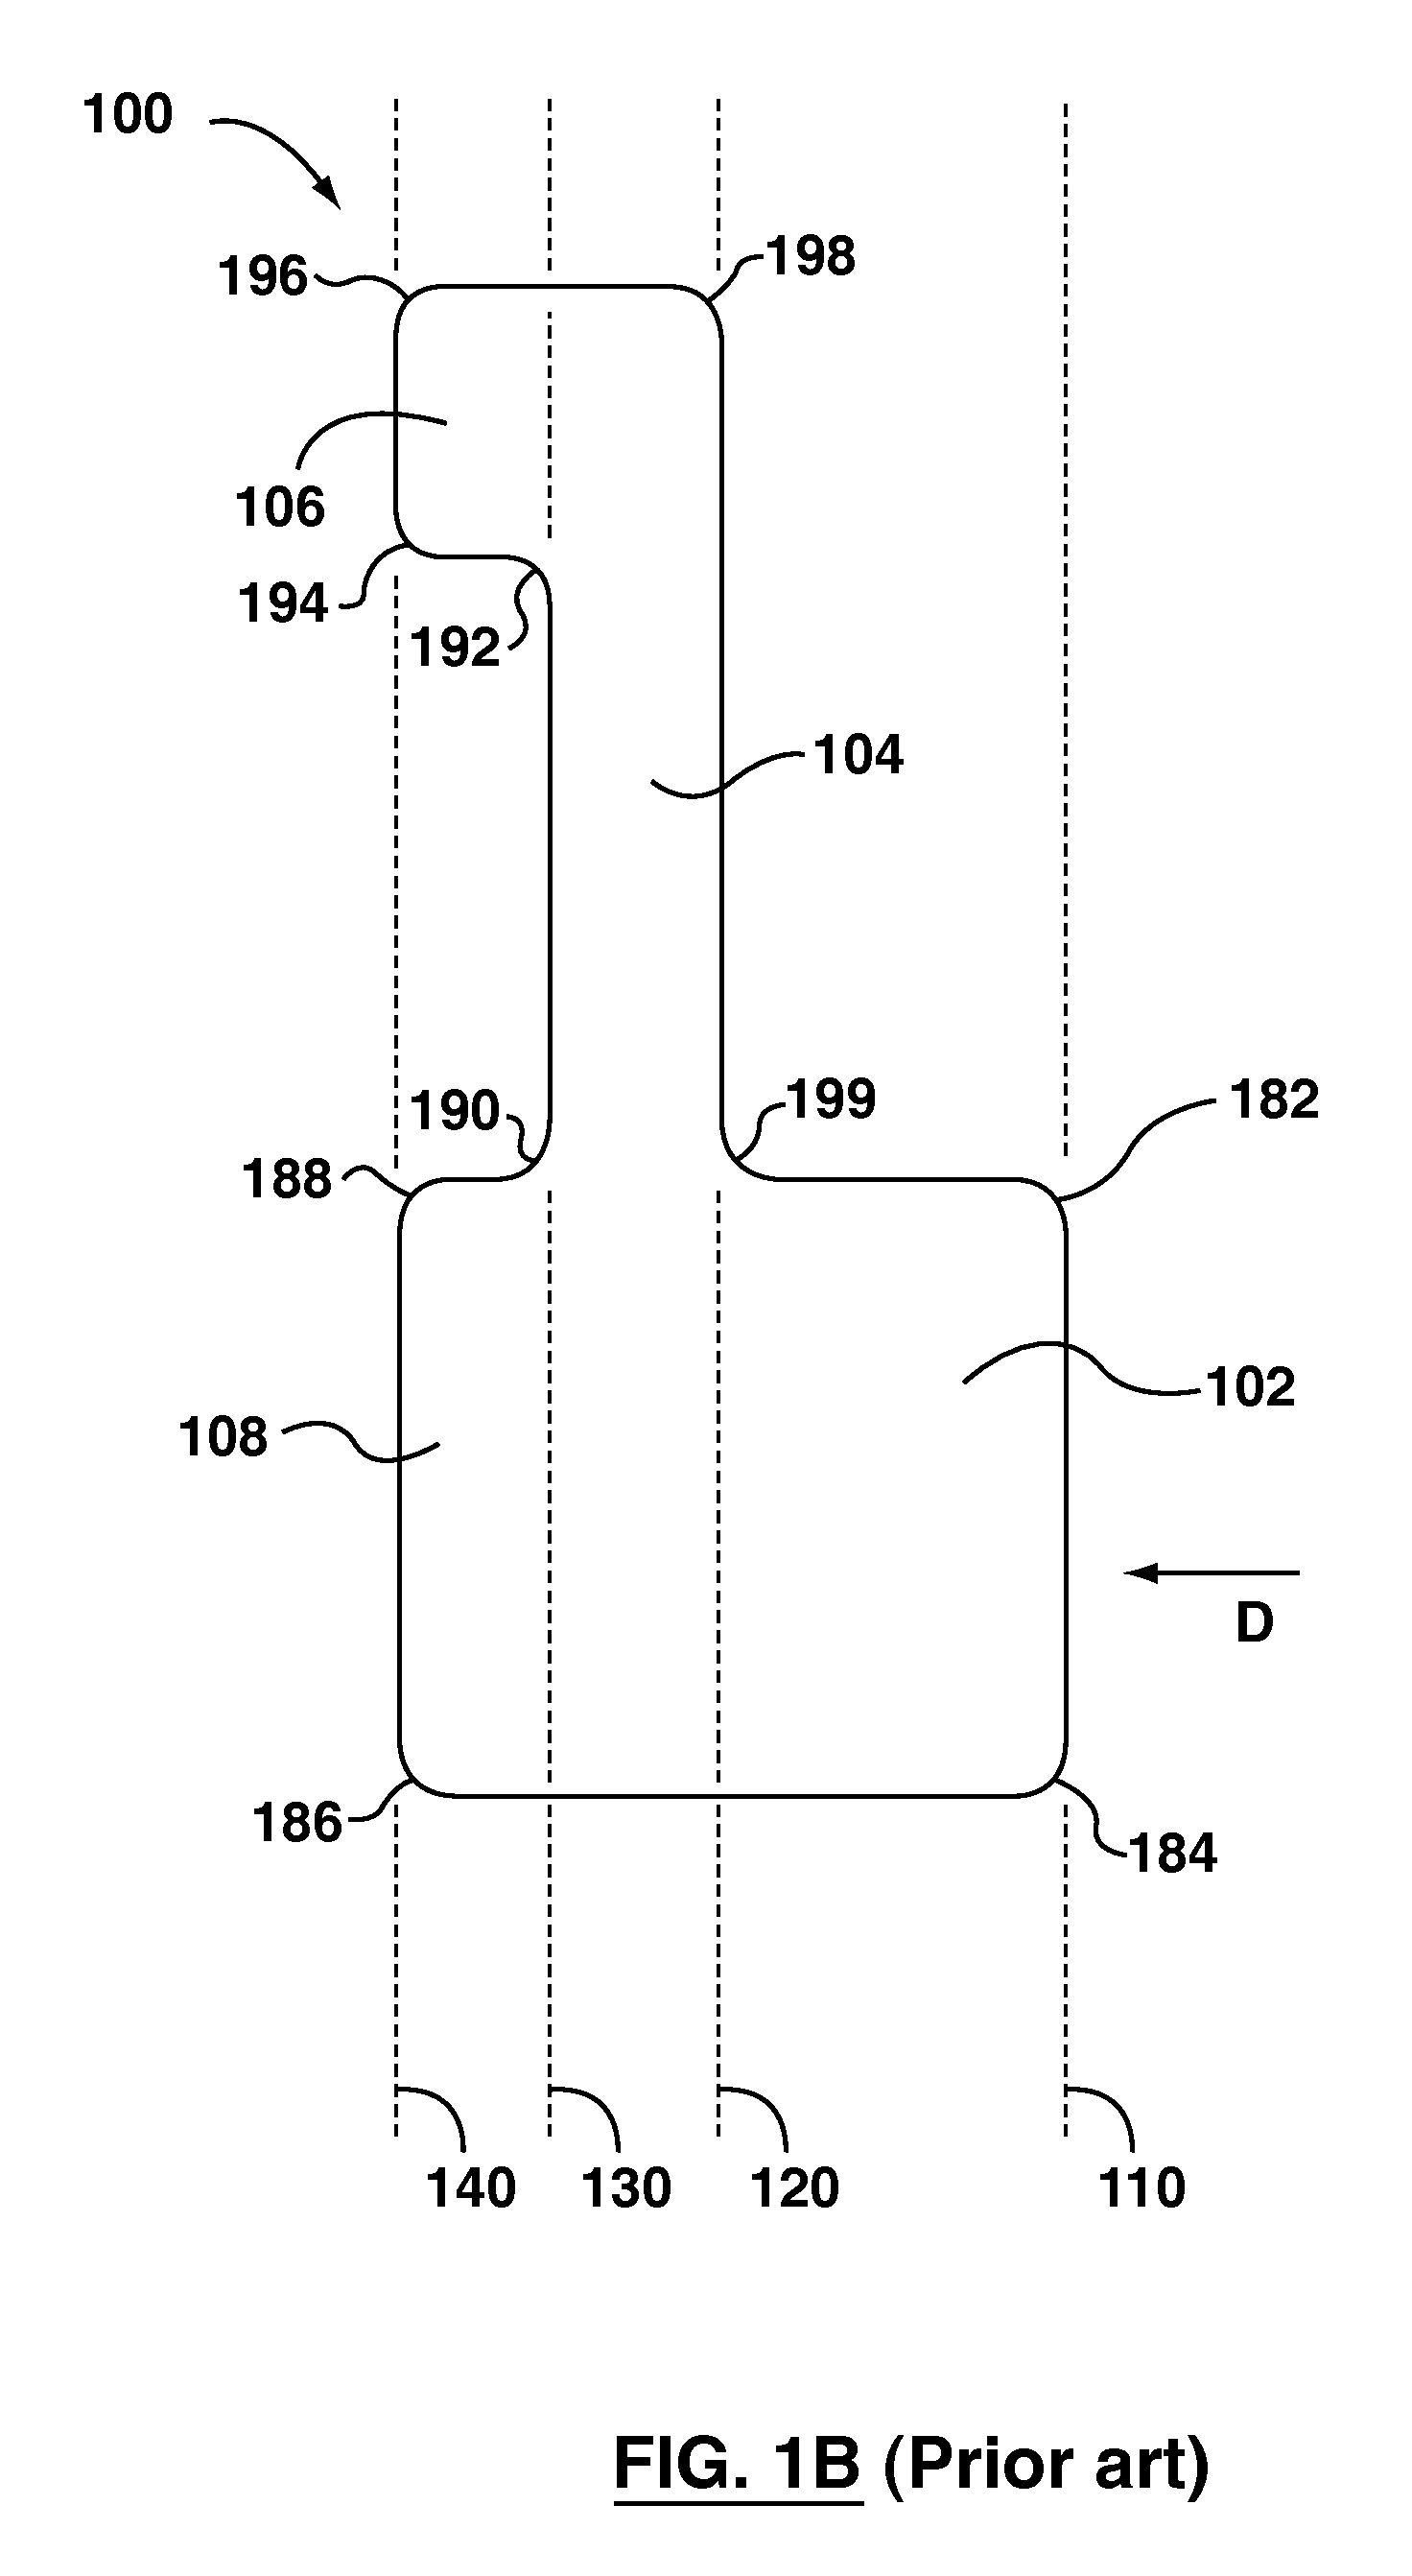 Method for Inkjet Printing of E13B Magnetic Ink Character Recognition Characters and Substrate Having Such Characters Printed Thereon